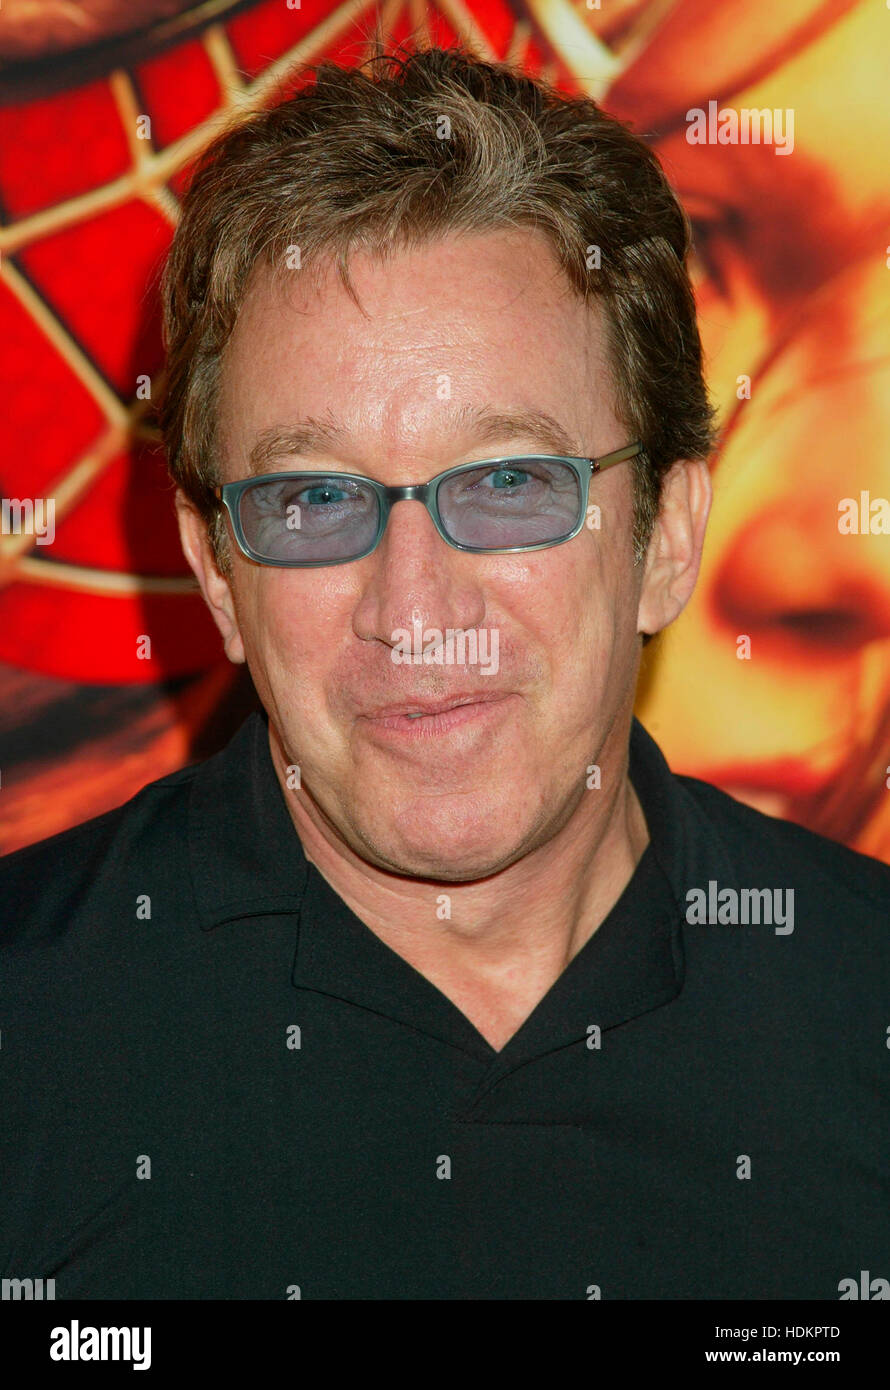 Actor Tim Allen at the premiere for the Columbia Pictures  film, 'Spider-man 2' at the Mann Village theatre in Westwood section of Los Angeles,  California on June 22, 2004.  Photo credit: Francis Specker Stock Photo